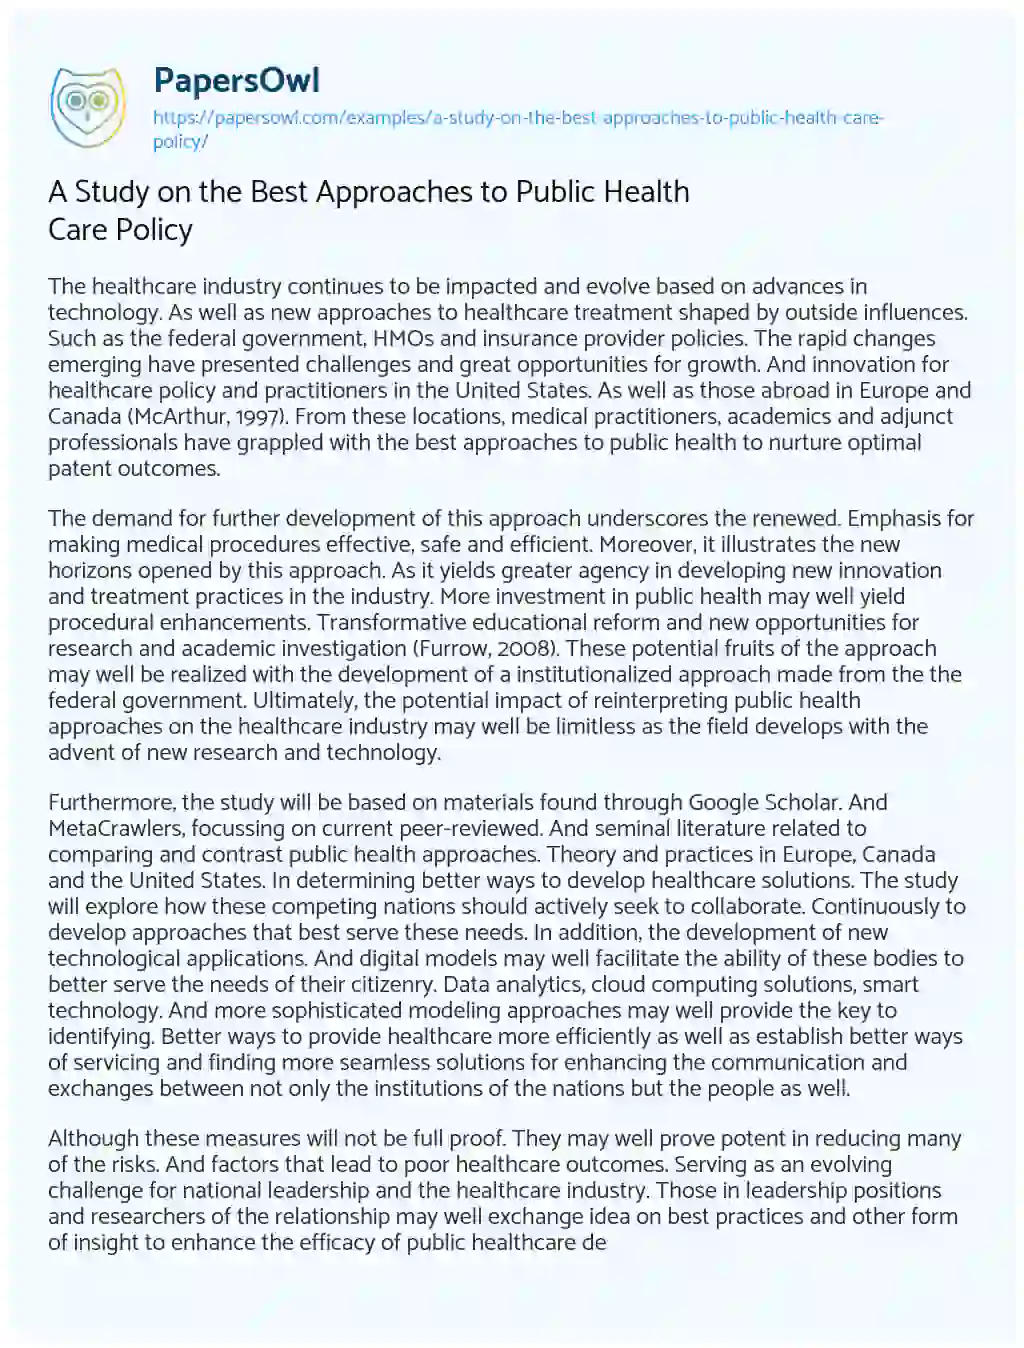 Essay on A Study on the Best Approaches to Public Health Care Policy